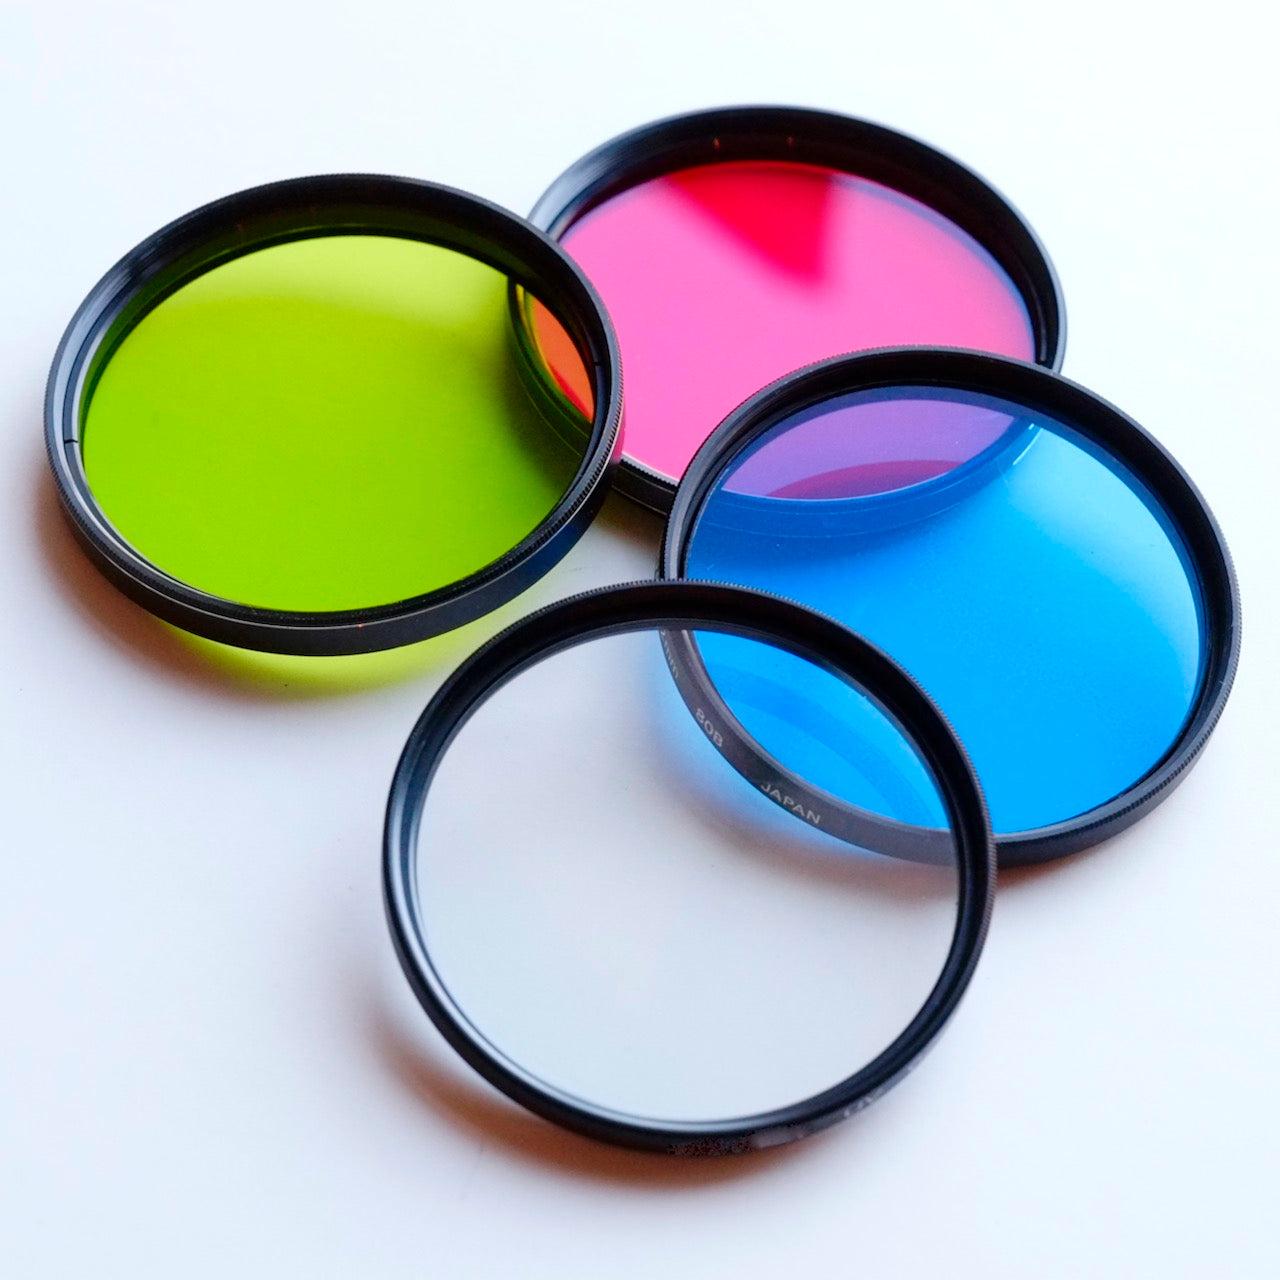 82mm filters